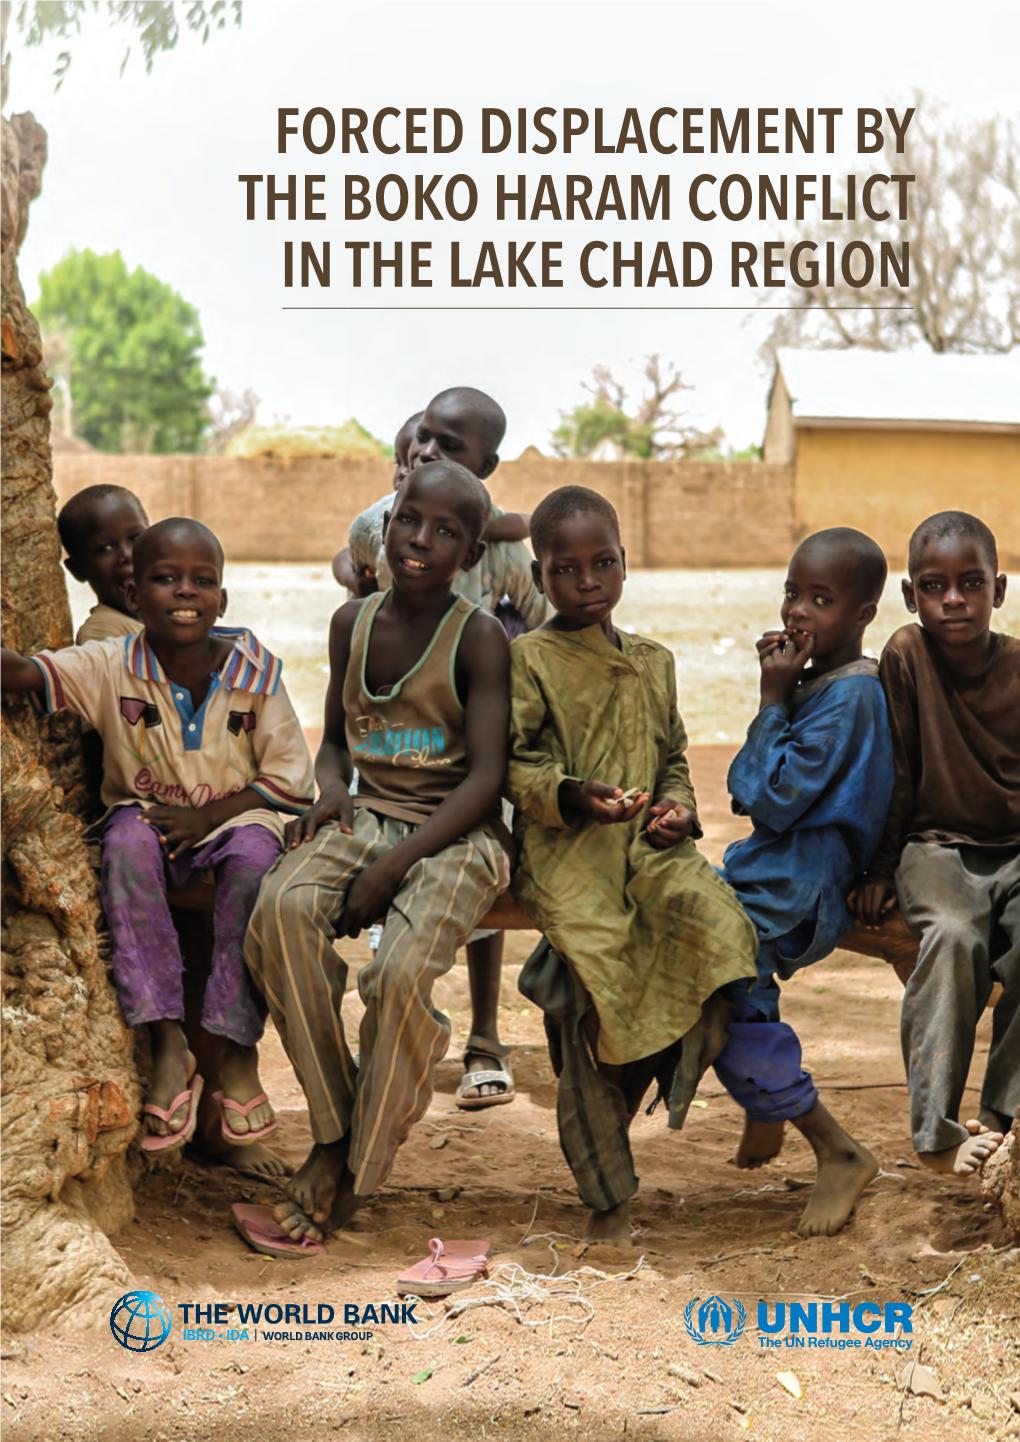 Forced Displacement by the Boko Haram Conflict in the Lake Chad Region